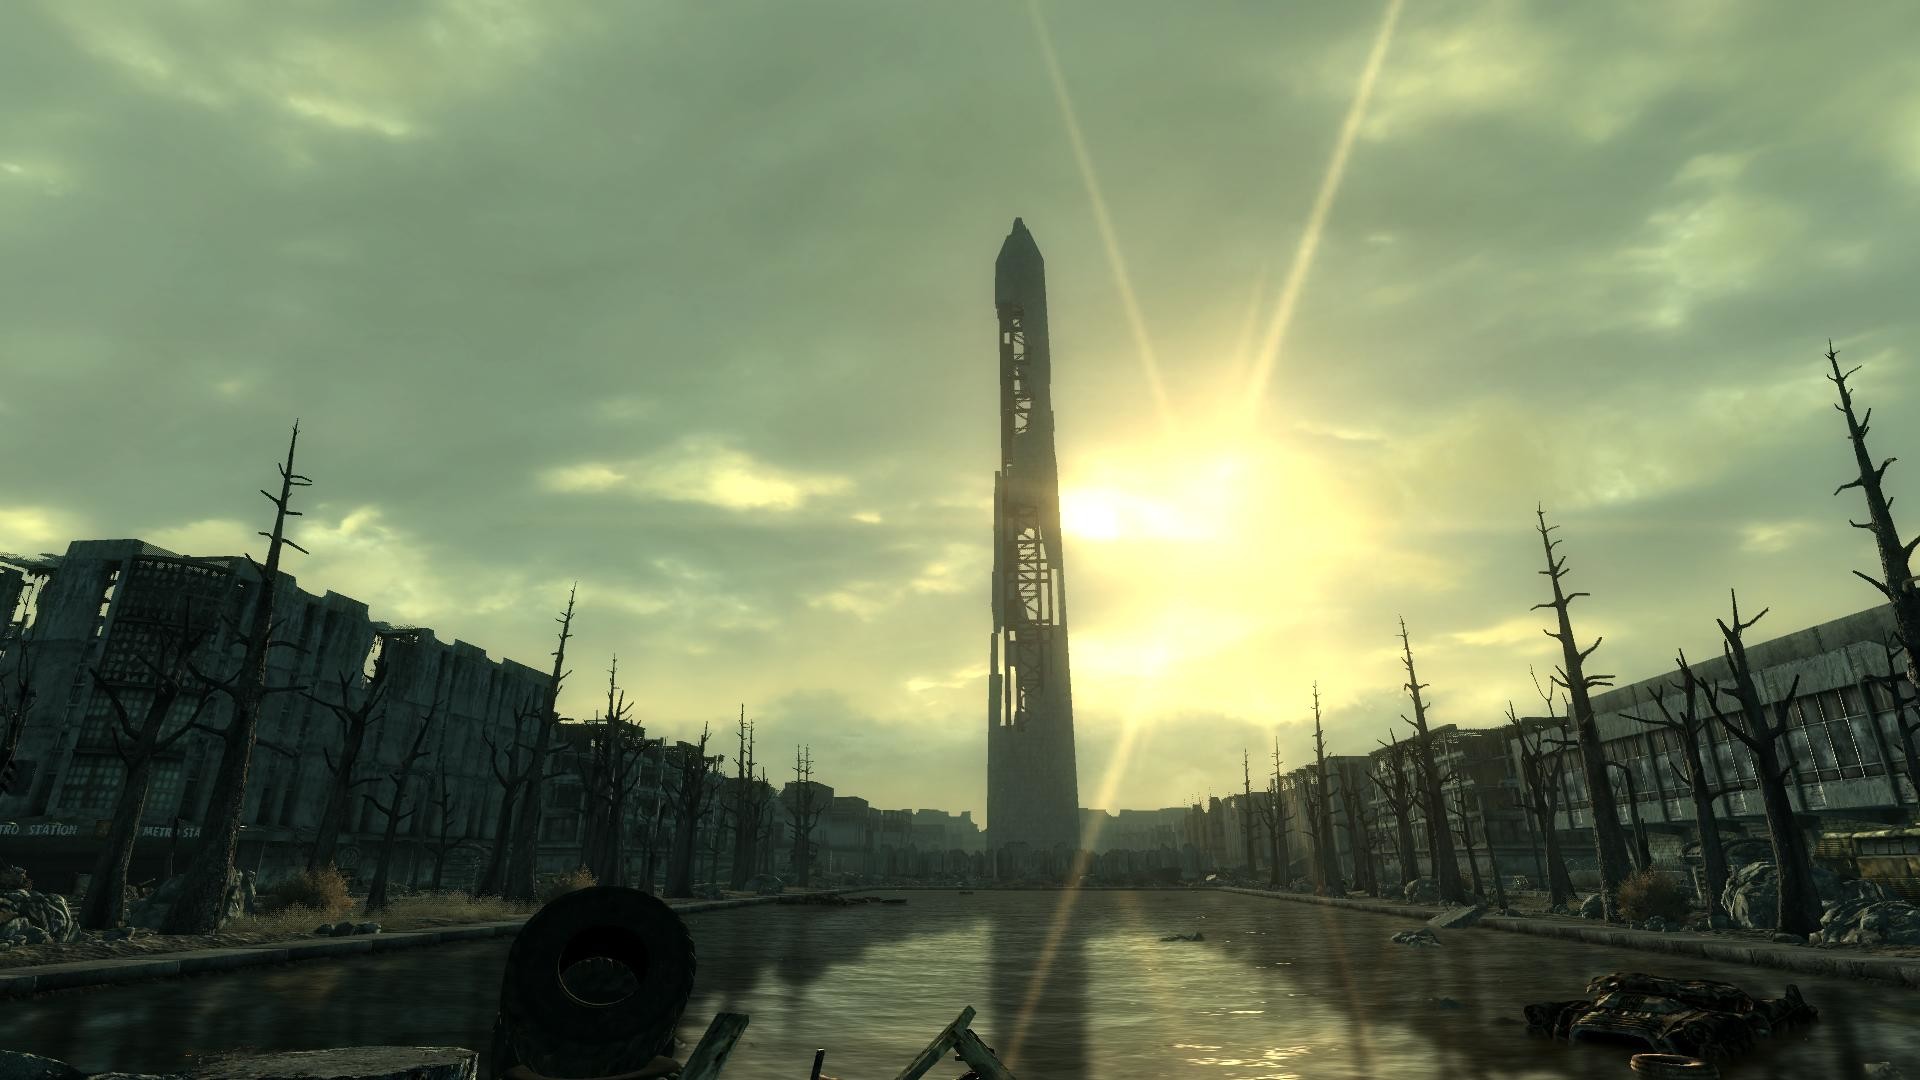 1920x1080 Fallout 3 Wallpapers, HD Quality Wallpapers of Fallout 3 : #2832648   px